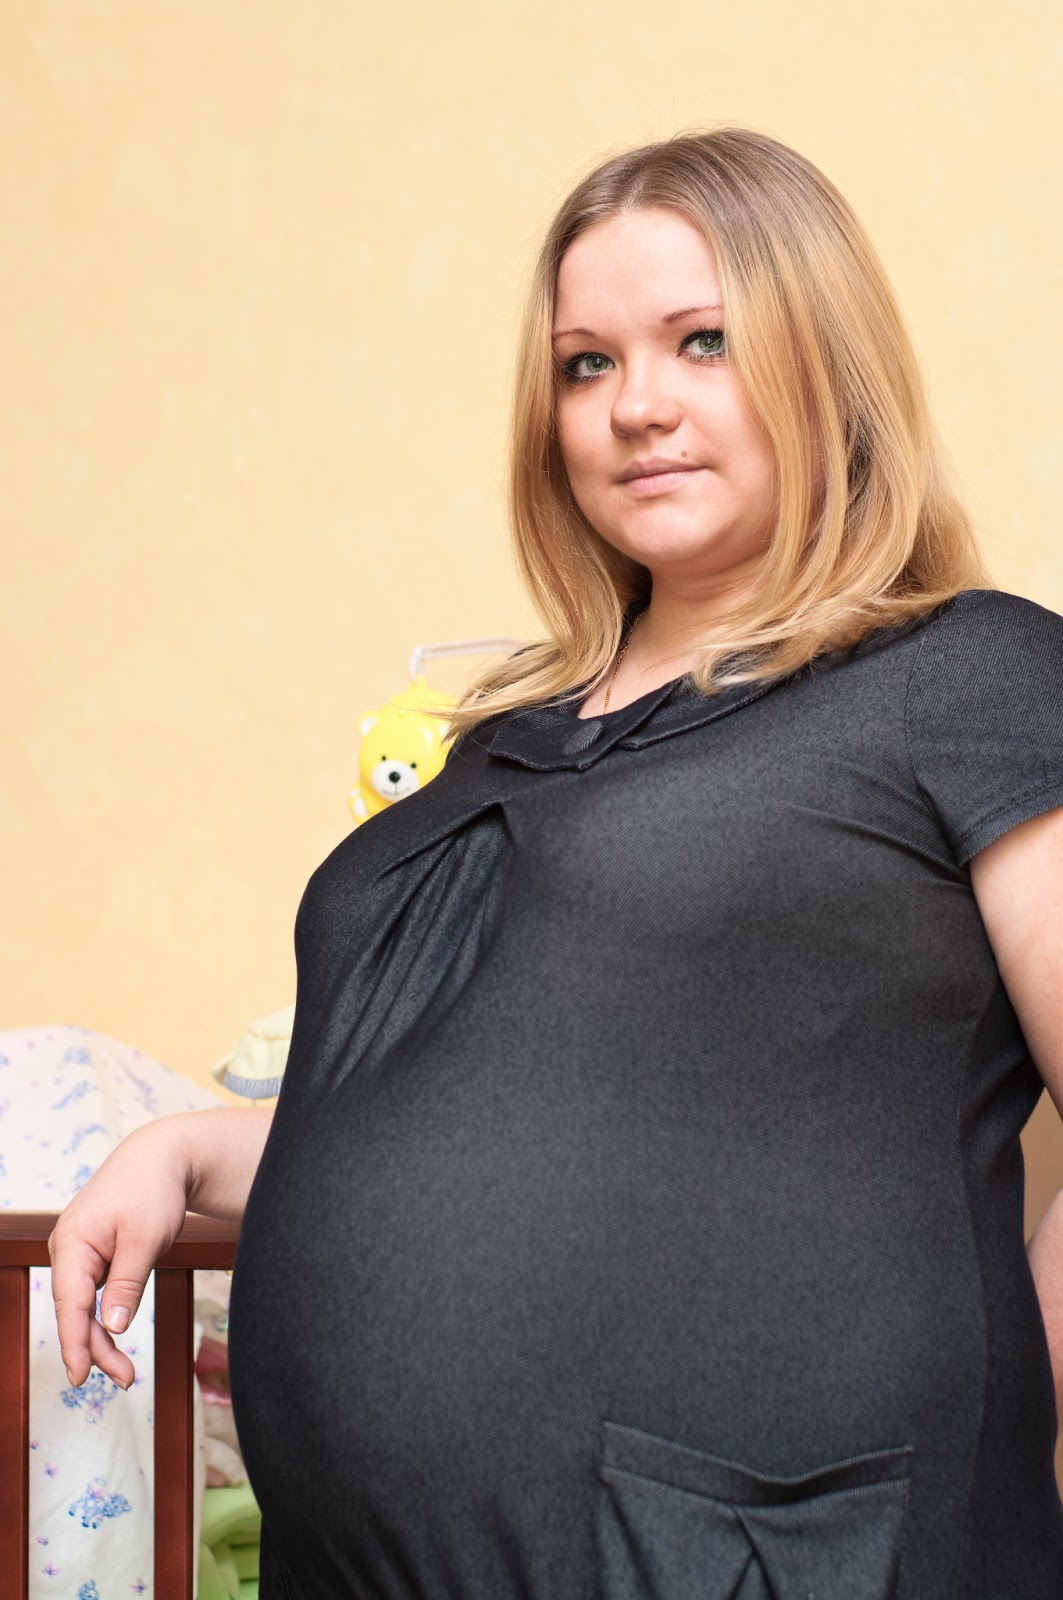 Obese Women Getting Pregnant 58